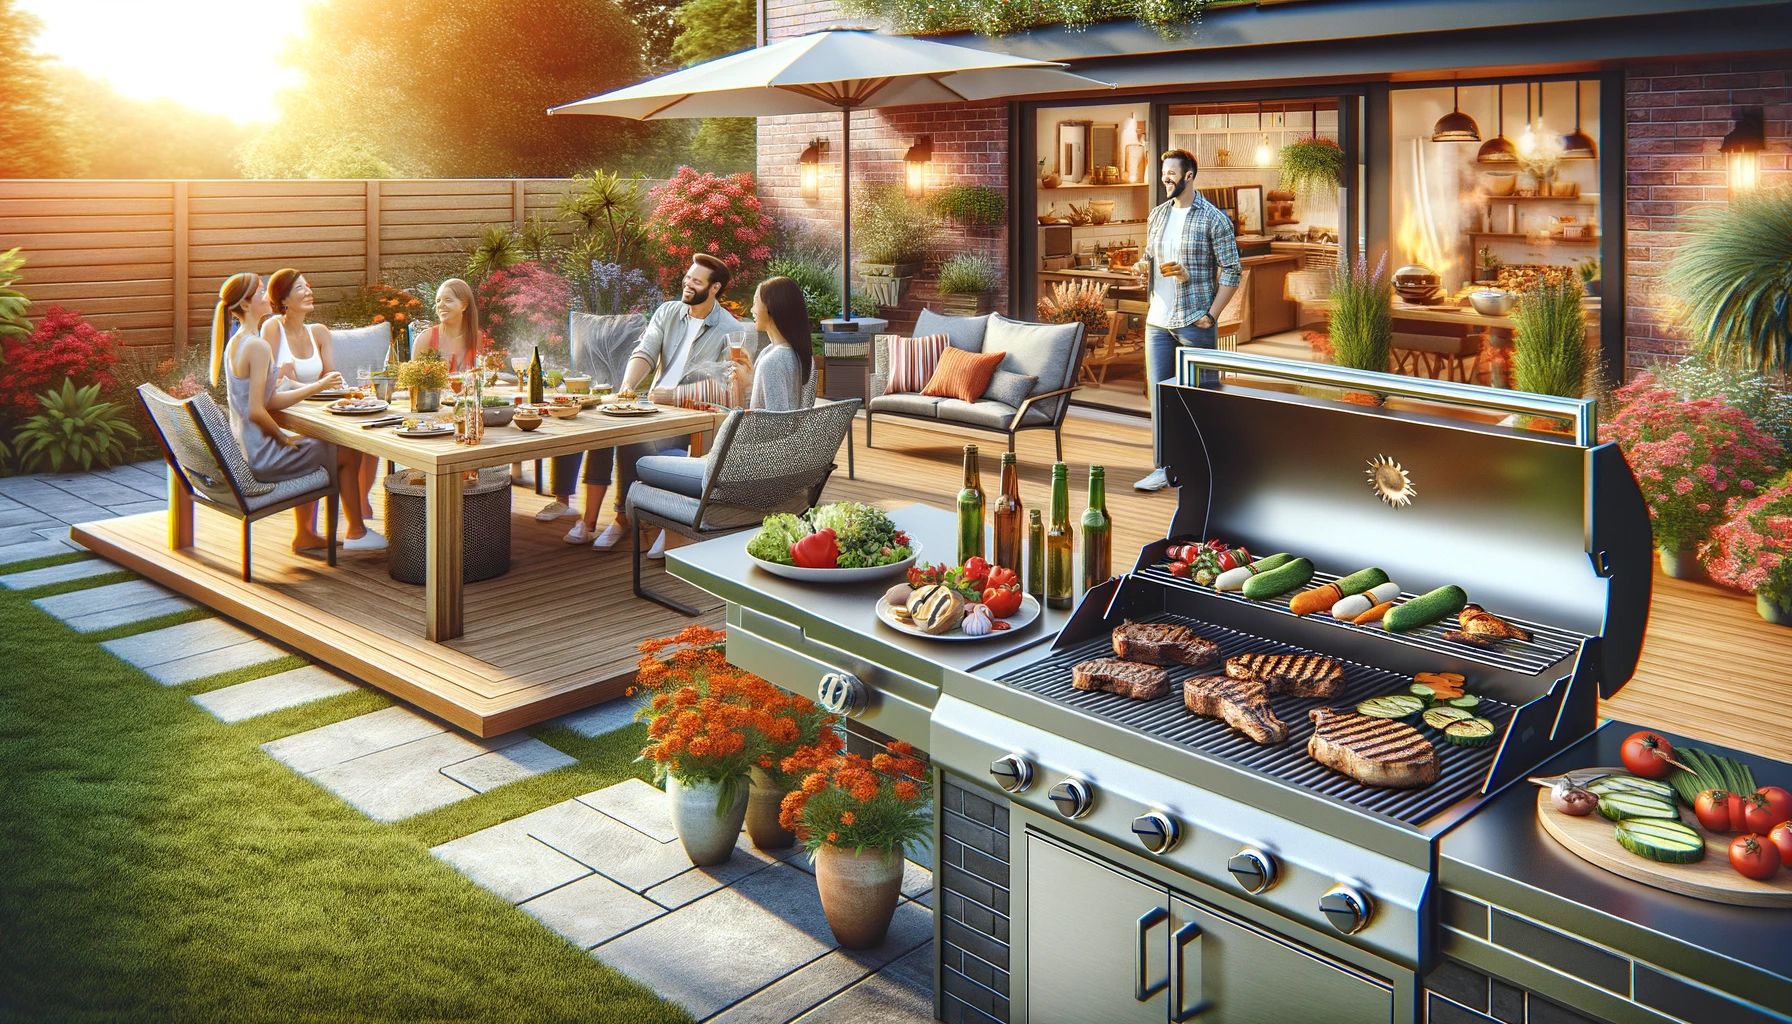 A backyard summer barbecue scene featuring a stylish modern outdoor kitchen with a high-end grill.